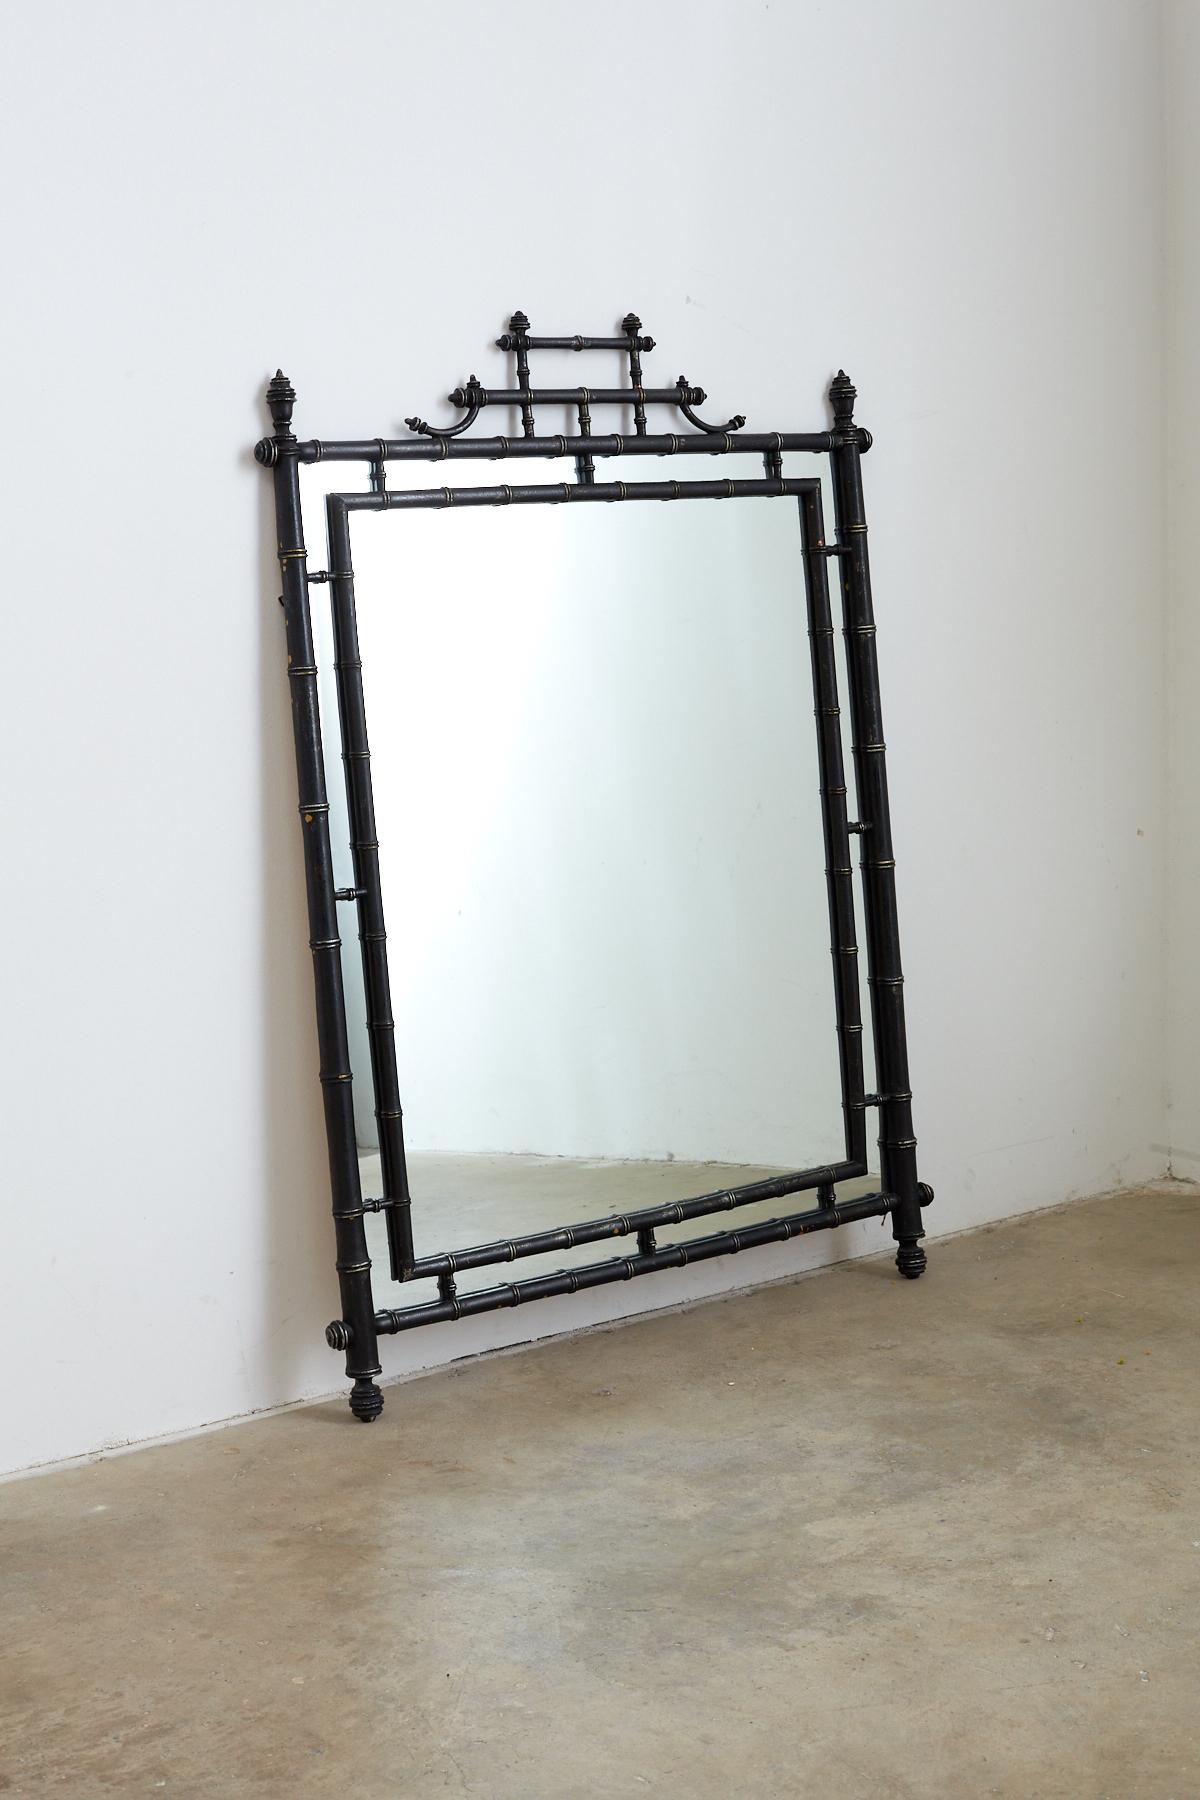 Impressive faux bamboo mirror with a black lacquer finish made in the English chinoiserie taste. Features a beautiful turned bamboo frame made by carver's guild. The lacquer finish has a stylish satin look with silver accents.